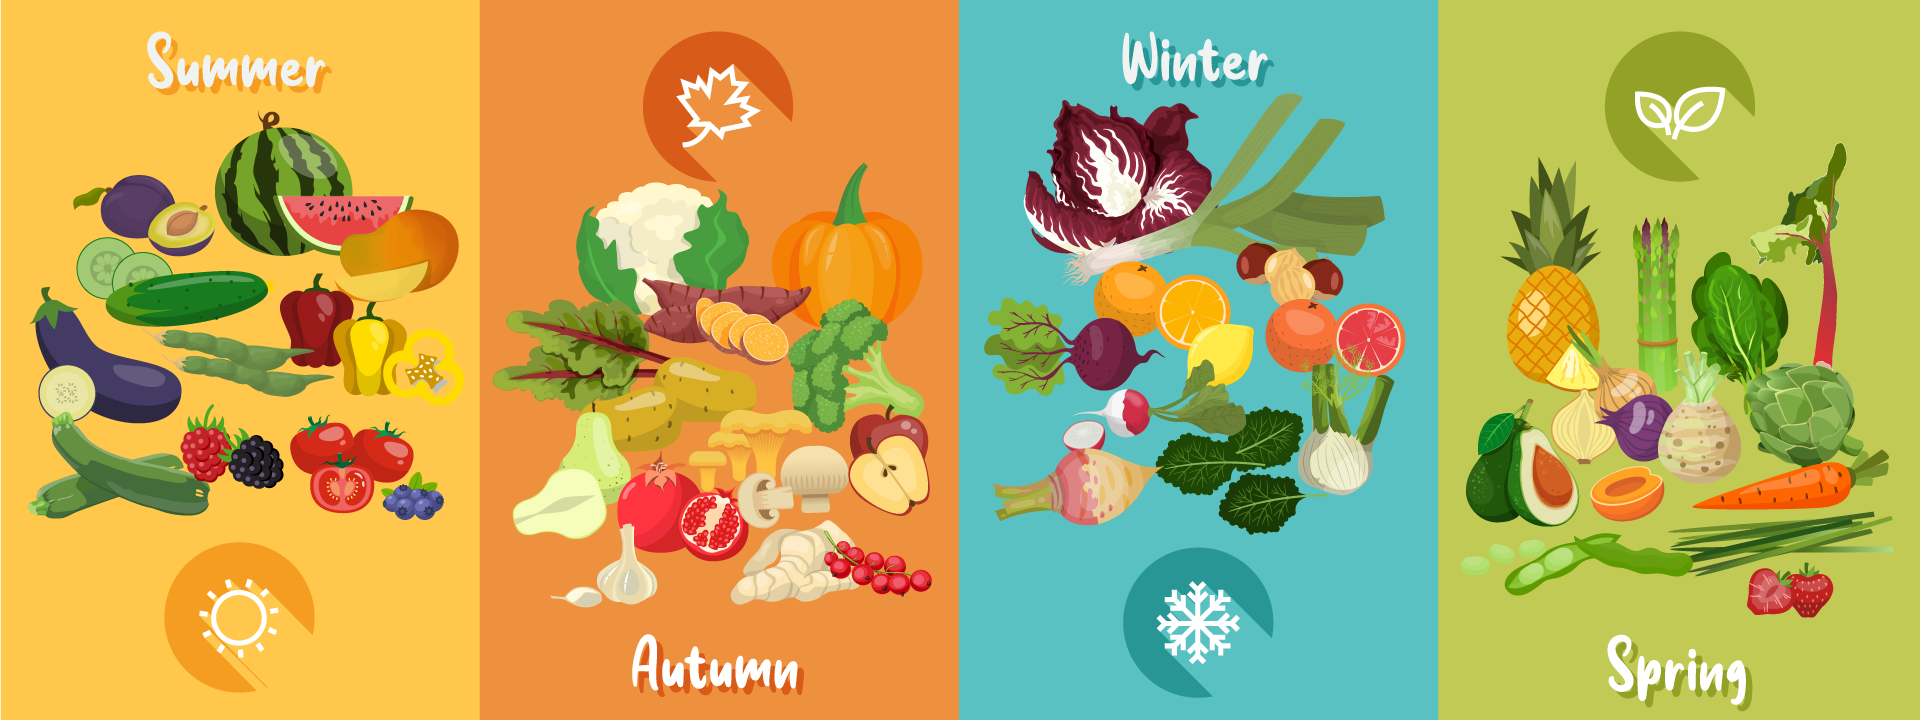 Eating With the Seasons